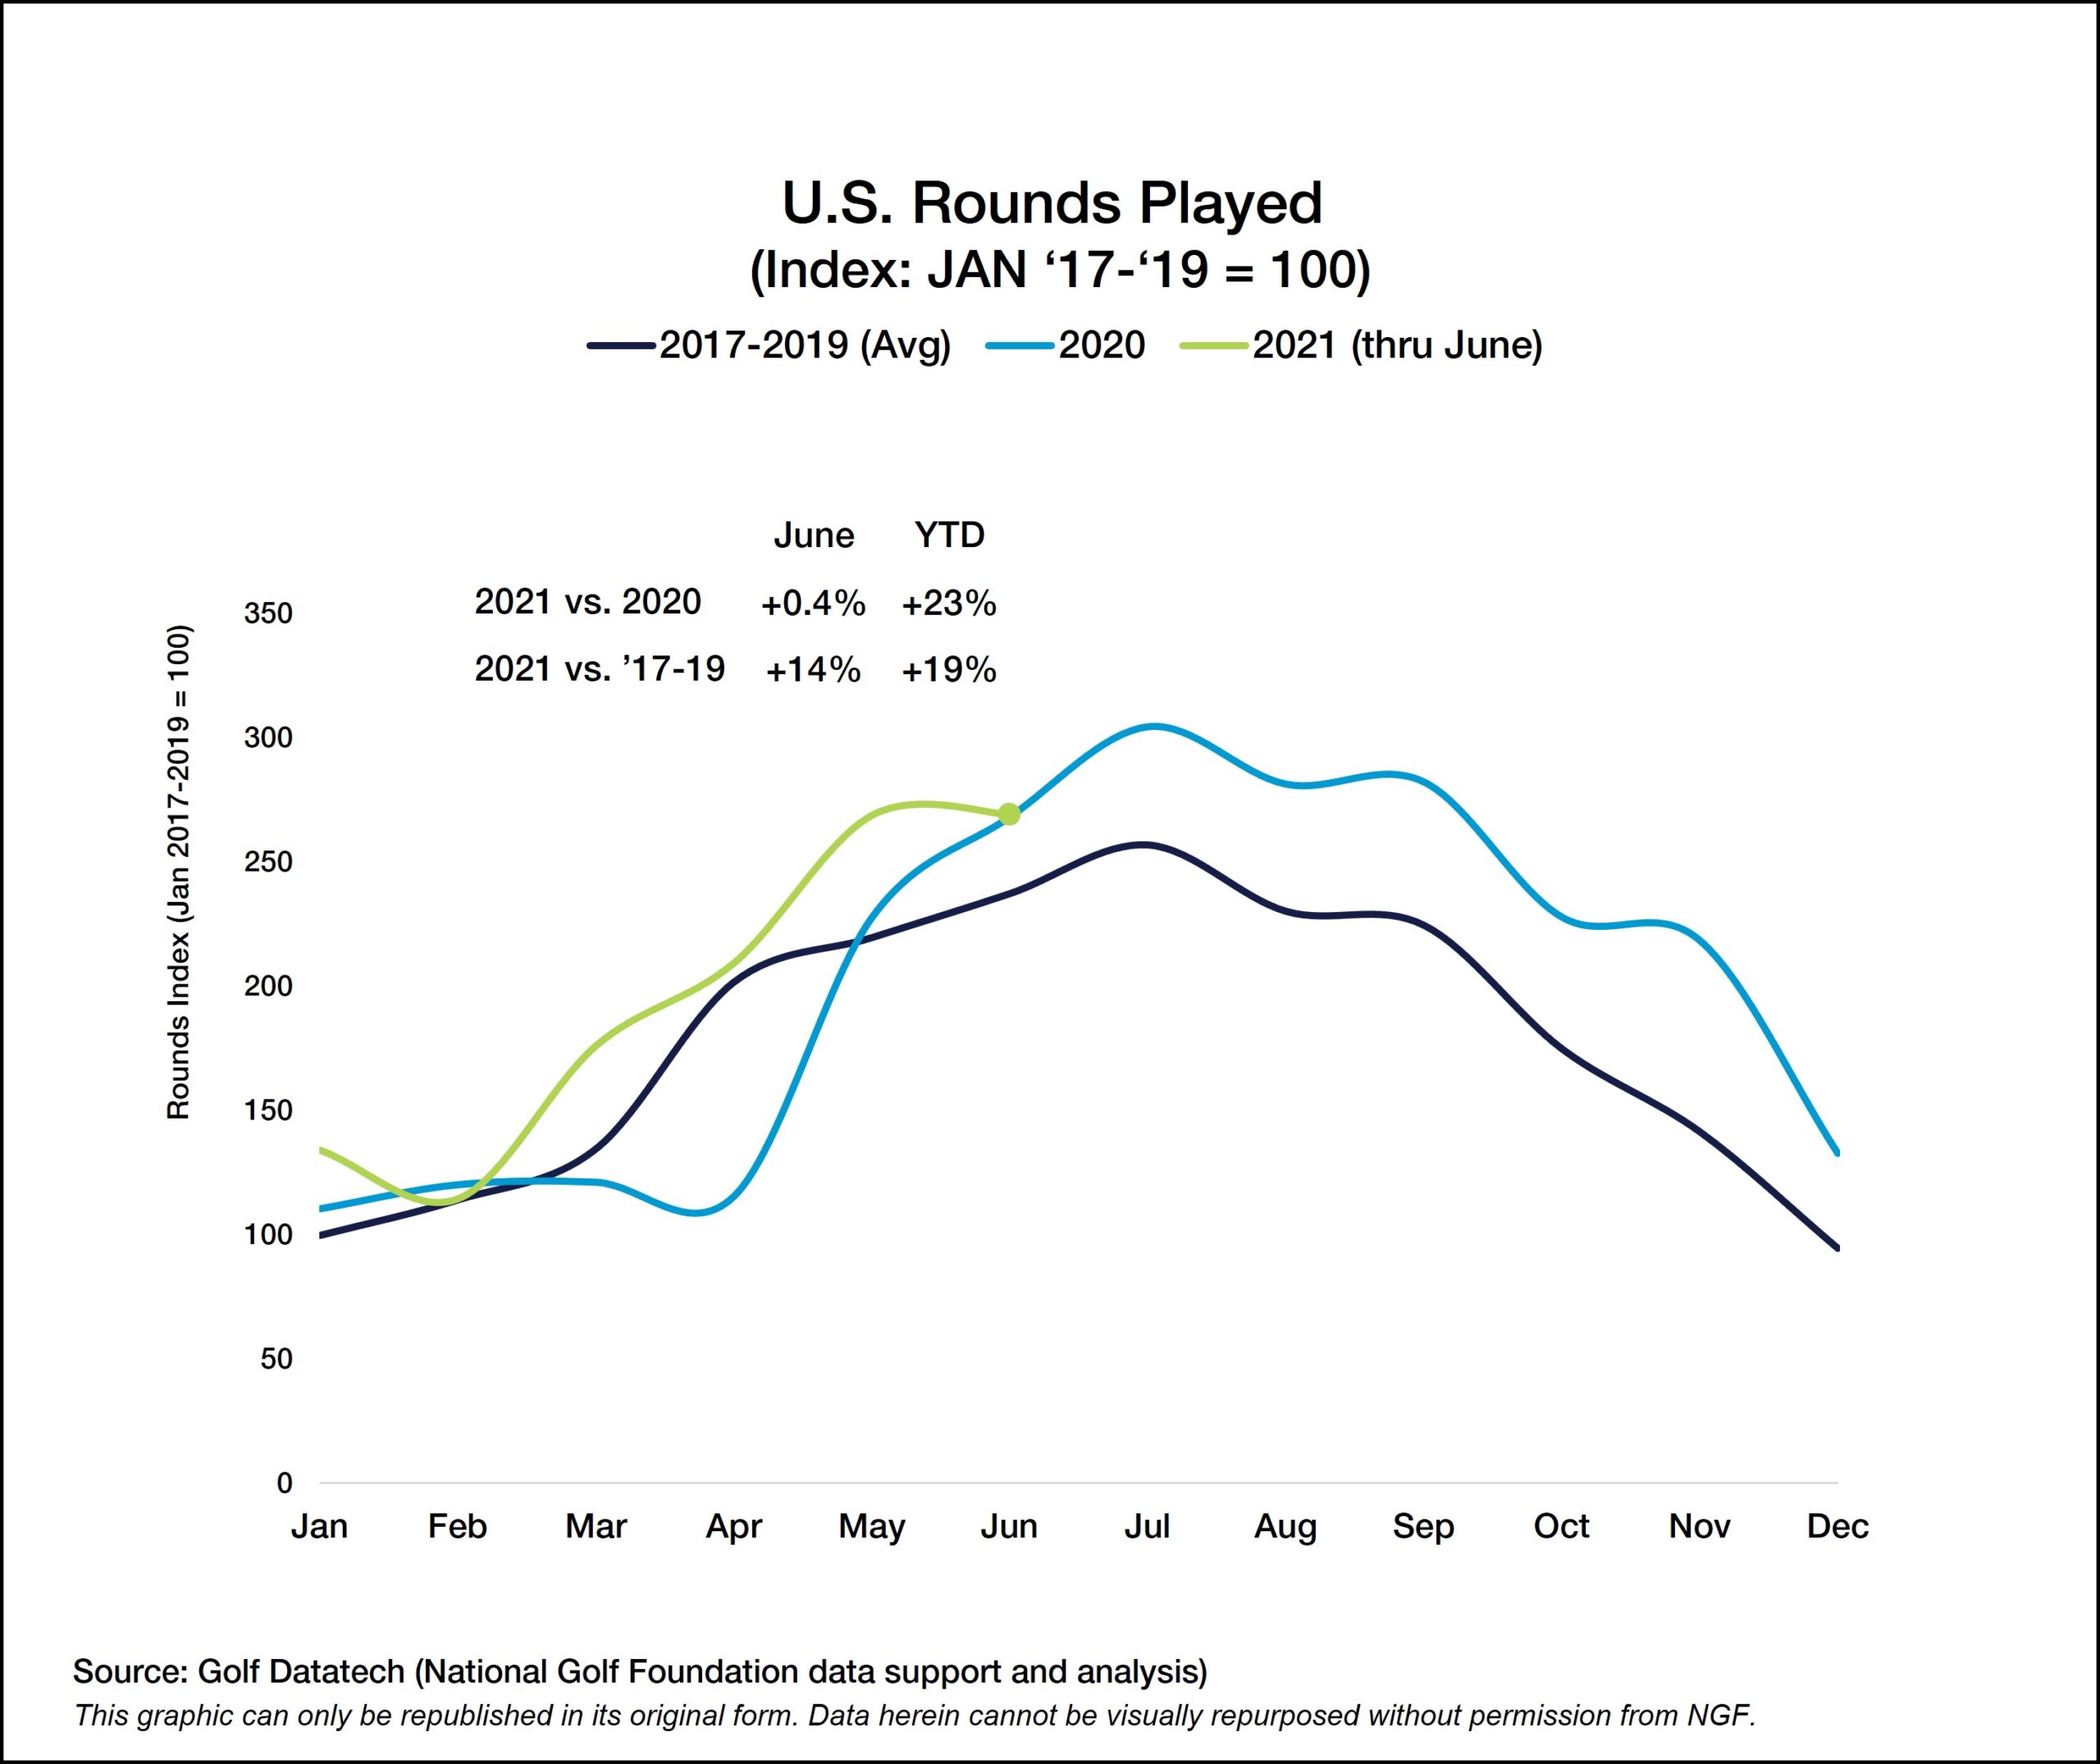 Rounds Played Continue at Elevated Levels